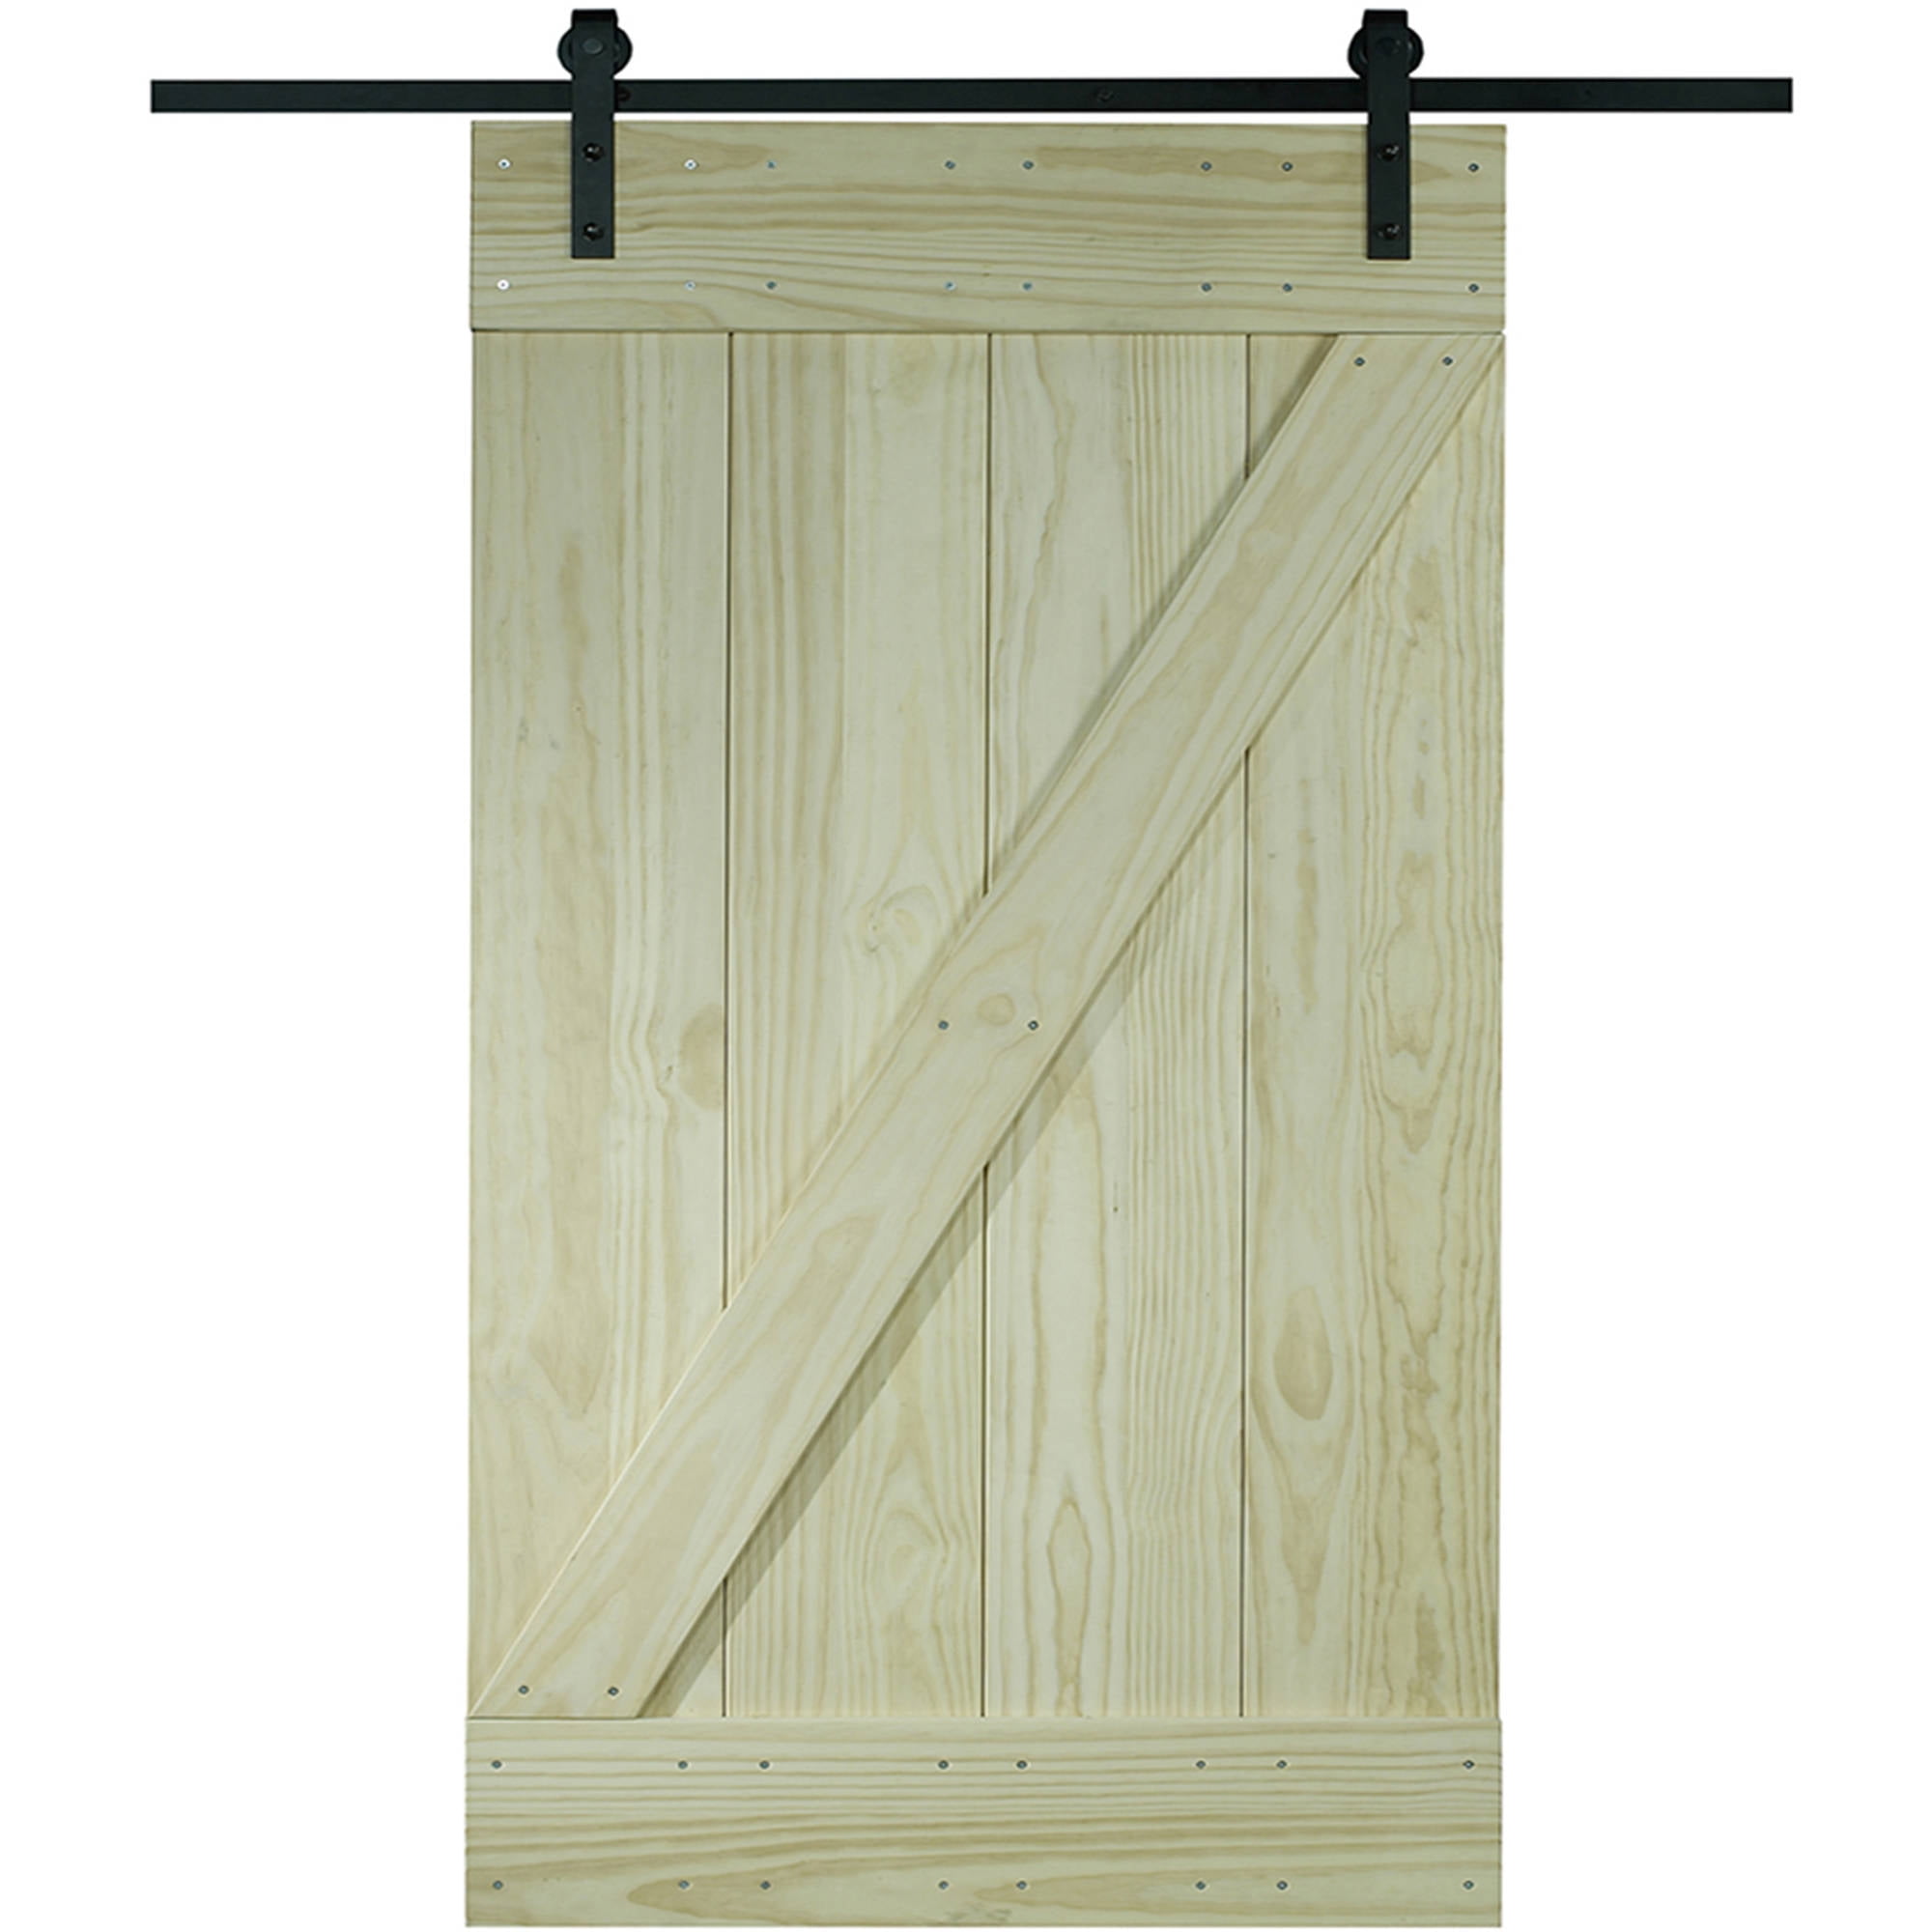 Kimberly Bay Paneled Solid Wood Unfinished Colonial Standard Door 30" x 80" 